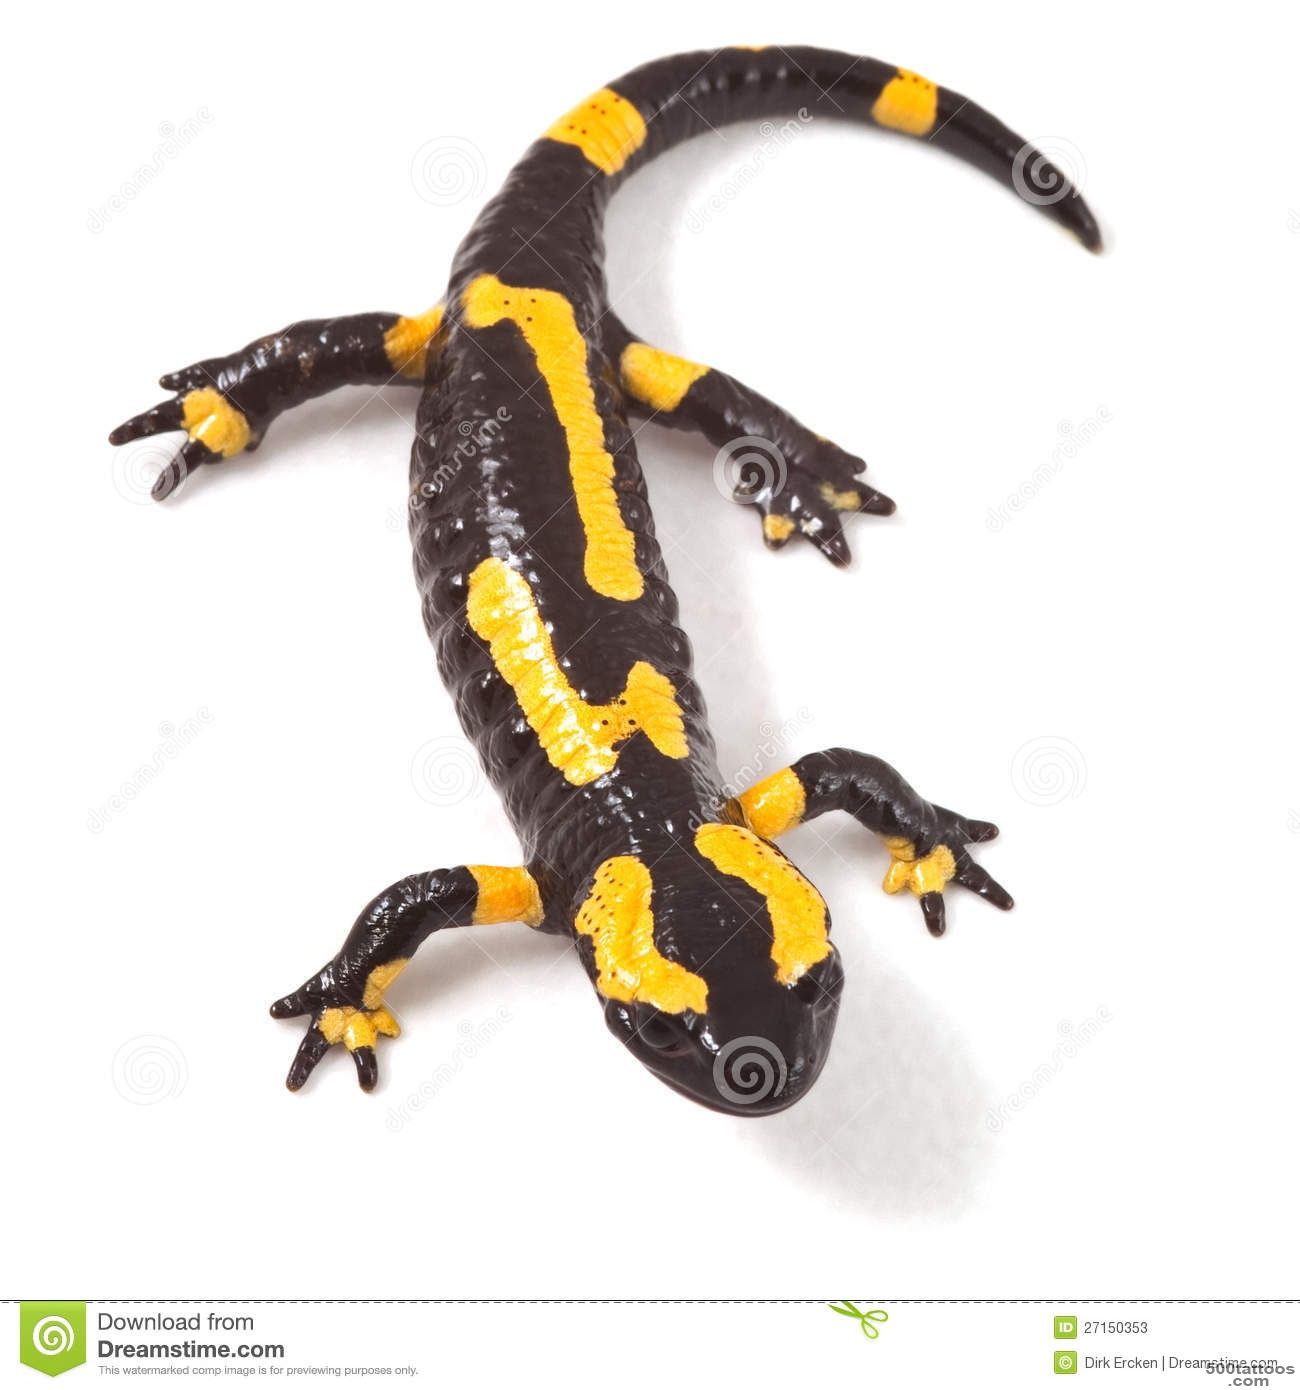 Pin Spotted Salamander Tattoo Pictures To Pin On Pinterest on ..._43